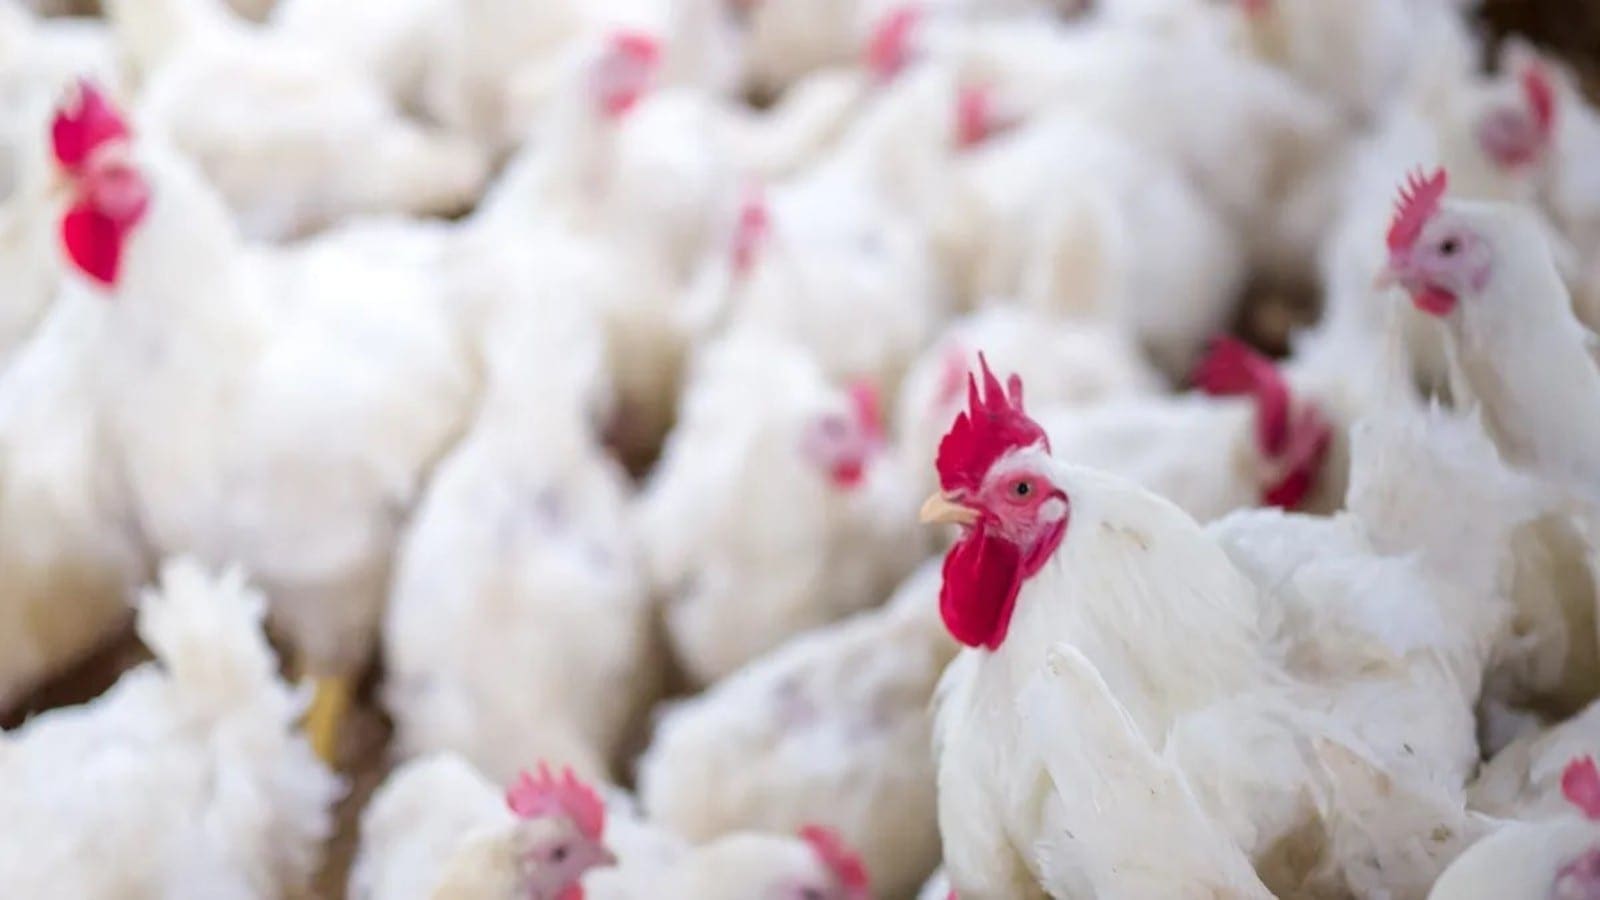 South Africa explores trade options to combat poultry shortages amid bird flu outbreak